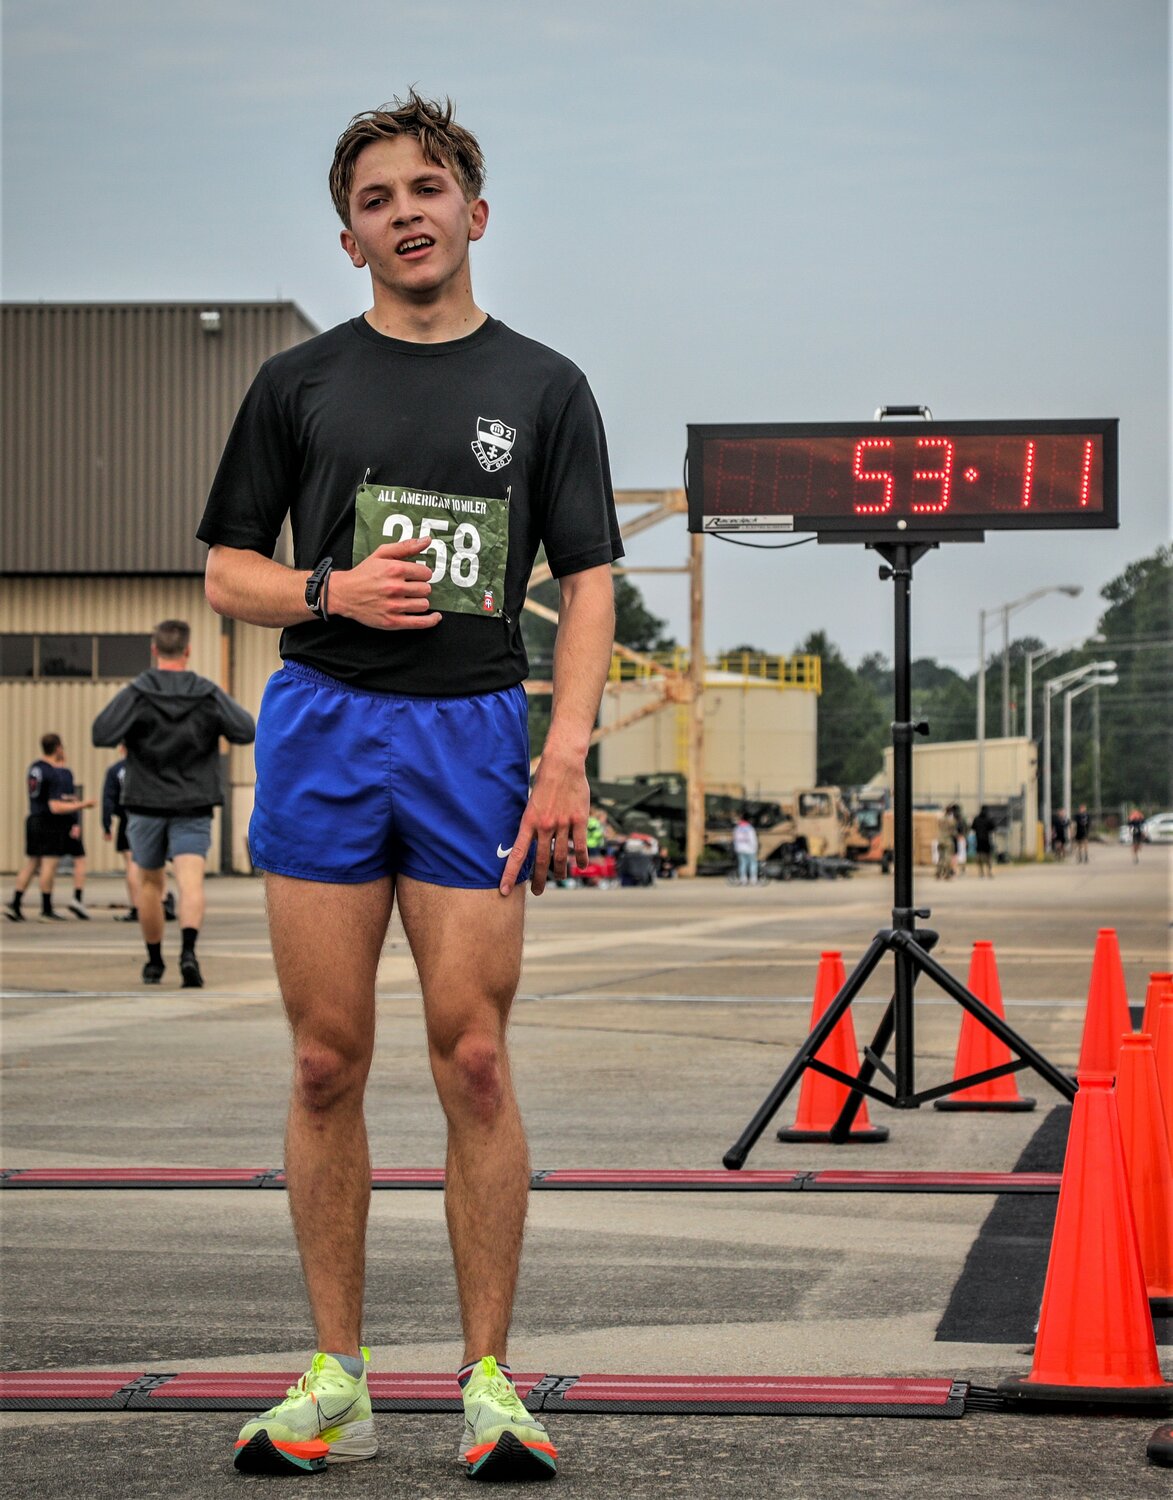 A paratrooper assigned to the 82nd Airborne Division stands next to a race clock after completing the All American 10-Miler Tuesday on Fort Bragg.